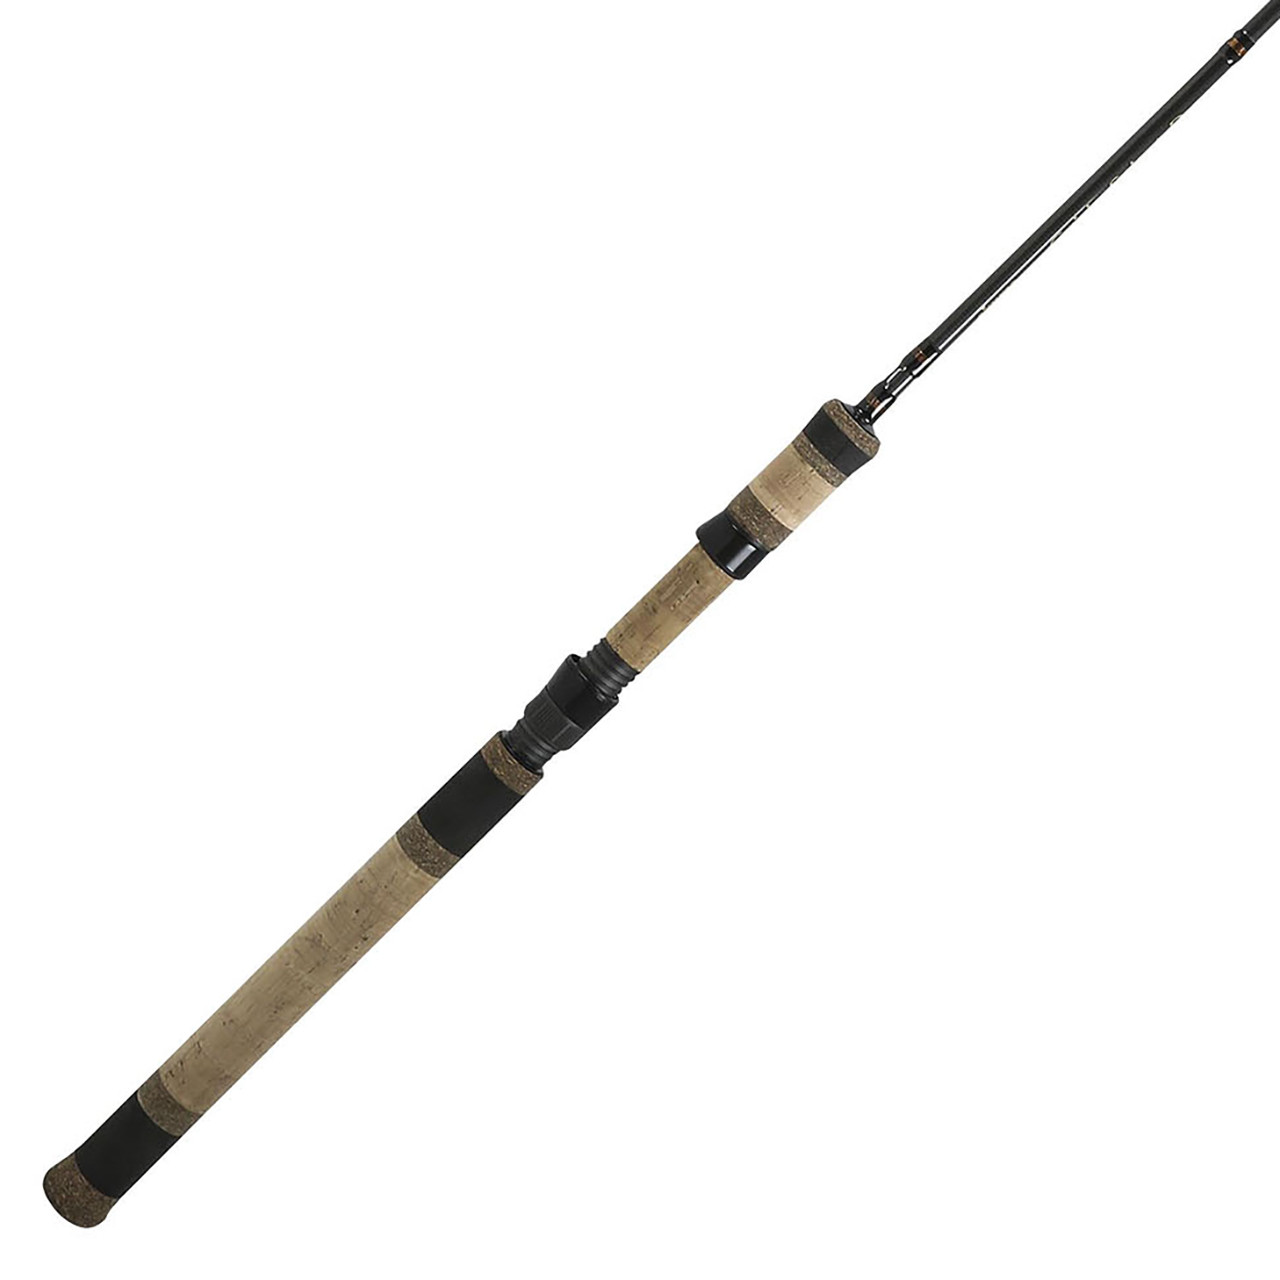 Okuma Guide Select Pro Trout Spinning Rod - GSP-S-802L